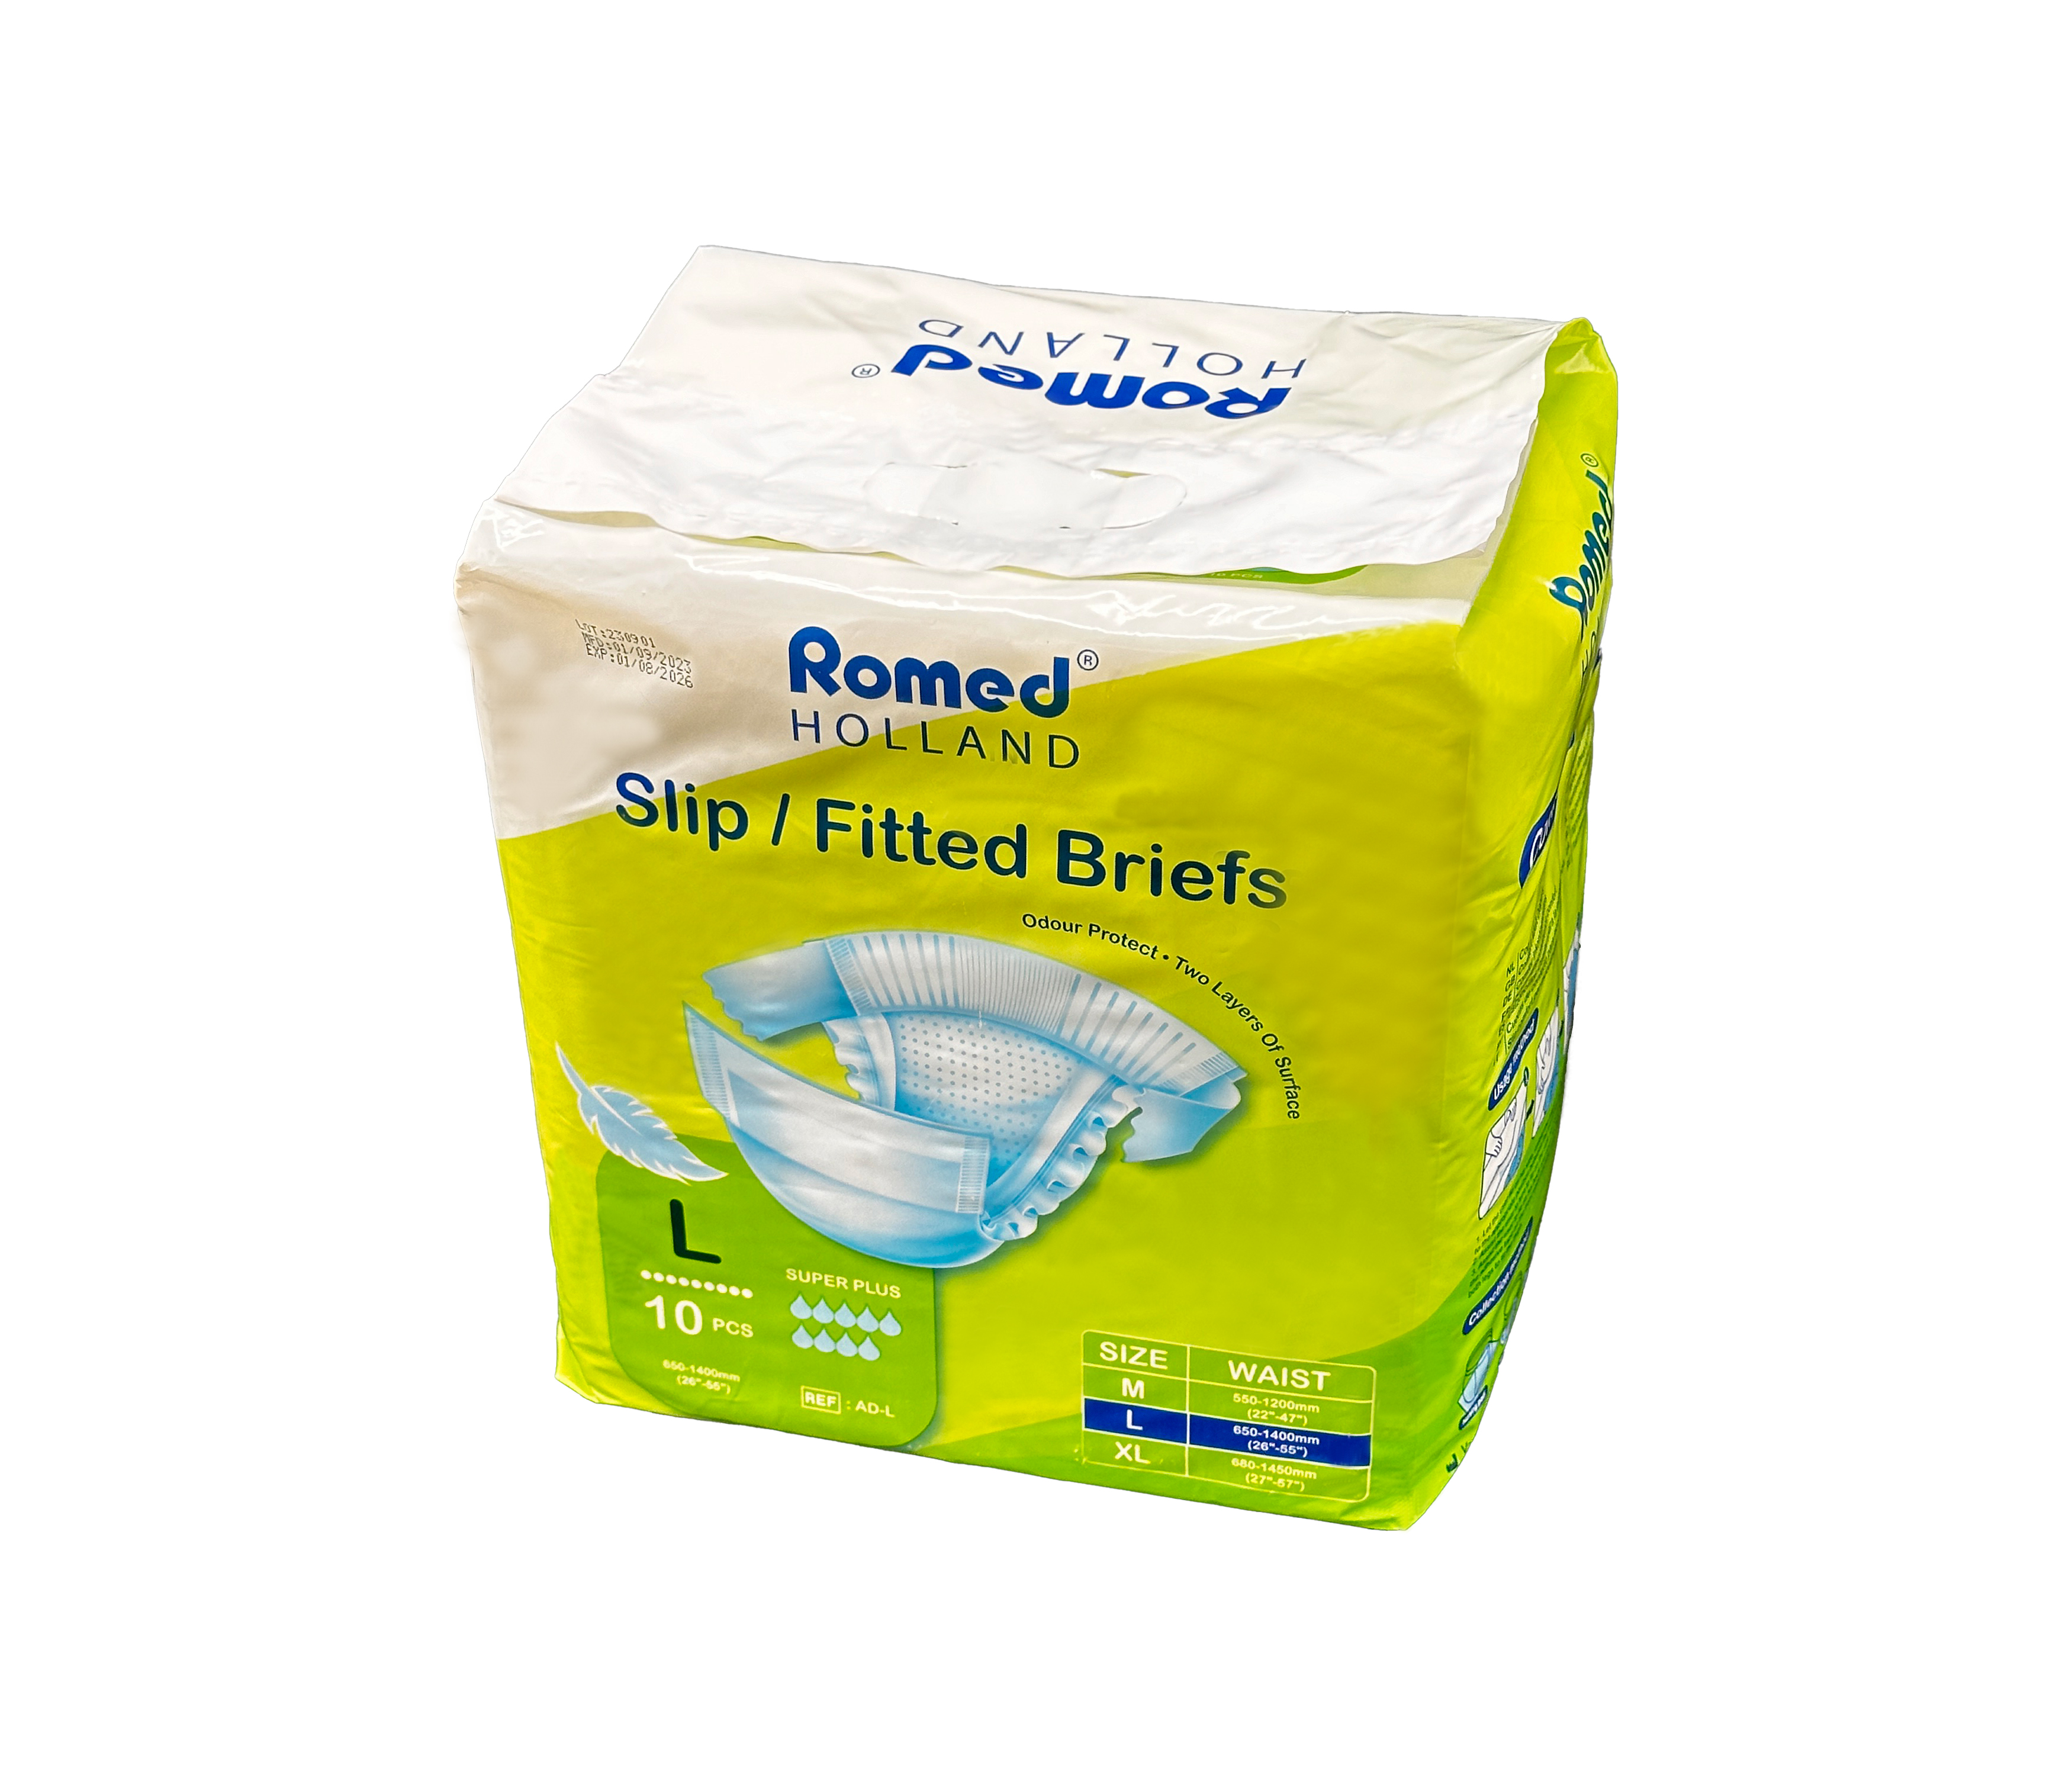 AD-M Romed Comfort Adult Diapers, medium, 10 pcs in a bag, 12 bags in a carton.

- Soft feel & Breathable
- Odour Protect
- Two Layers of Surface
- Wetness indicator
- Unisex
- Size: medium (550-1200mm (22''-47'')